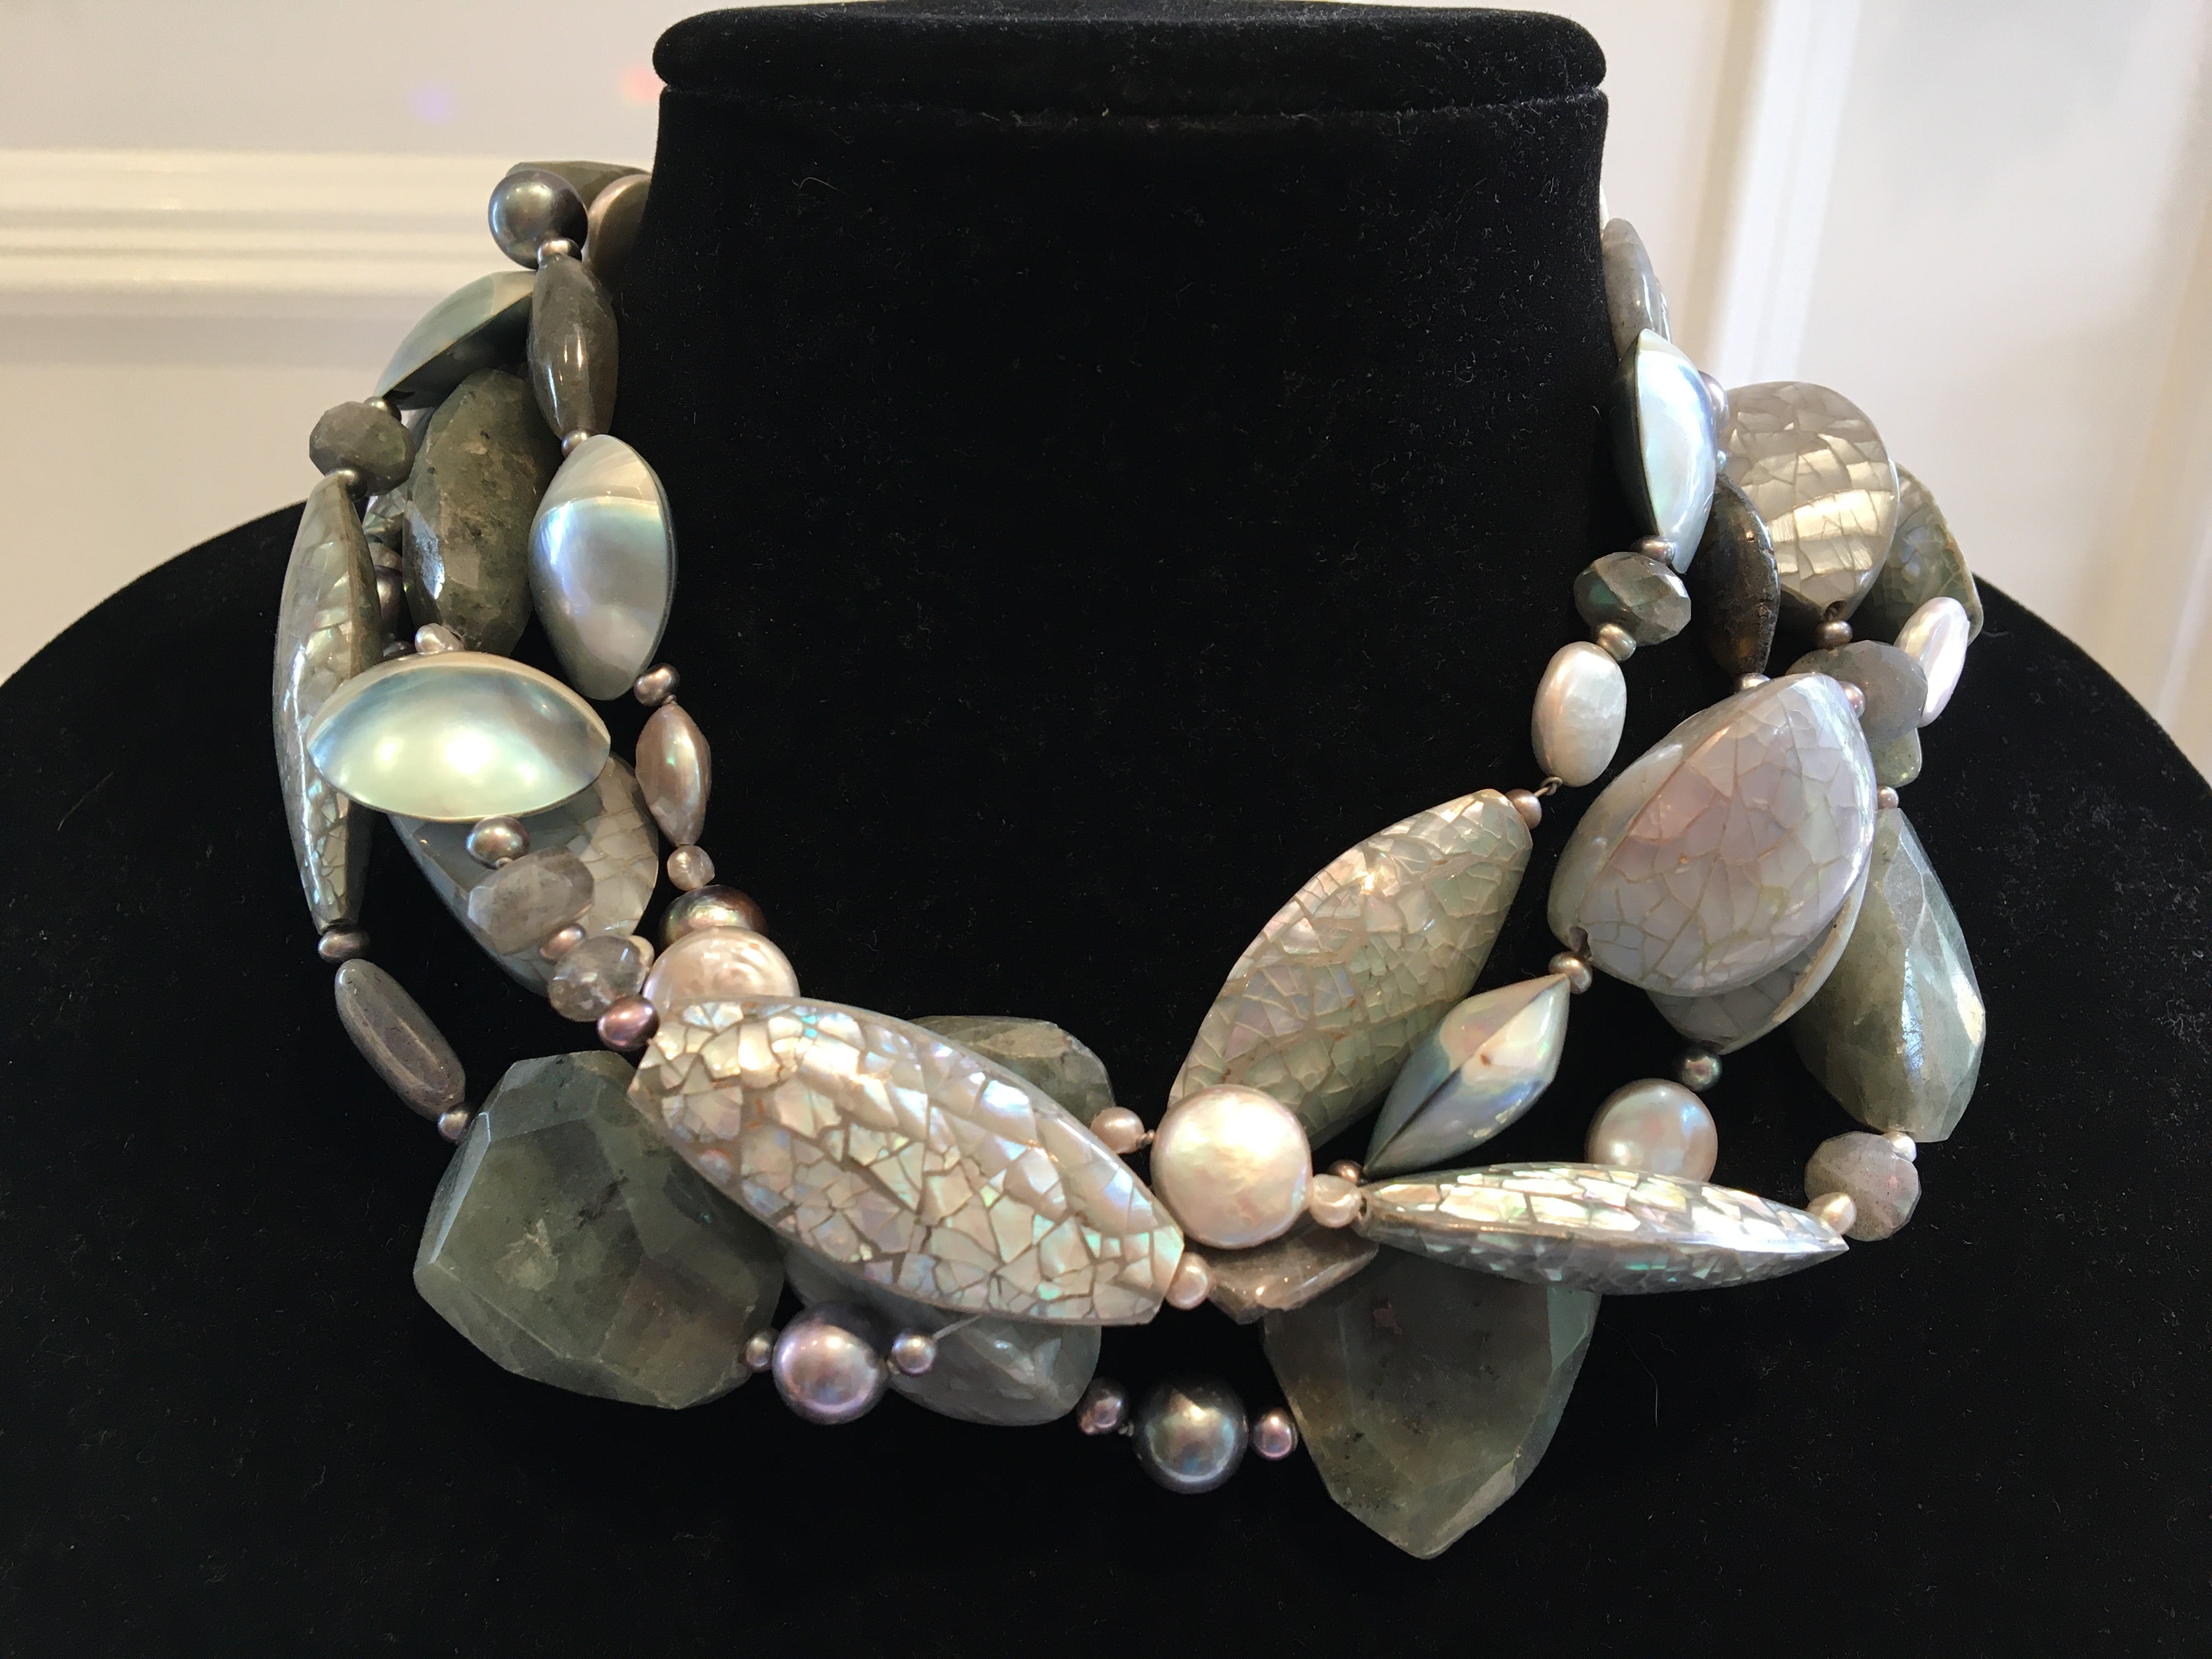 Grey Lace Agate Choker w/ Silver Seed Pearls